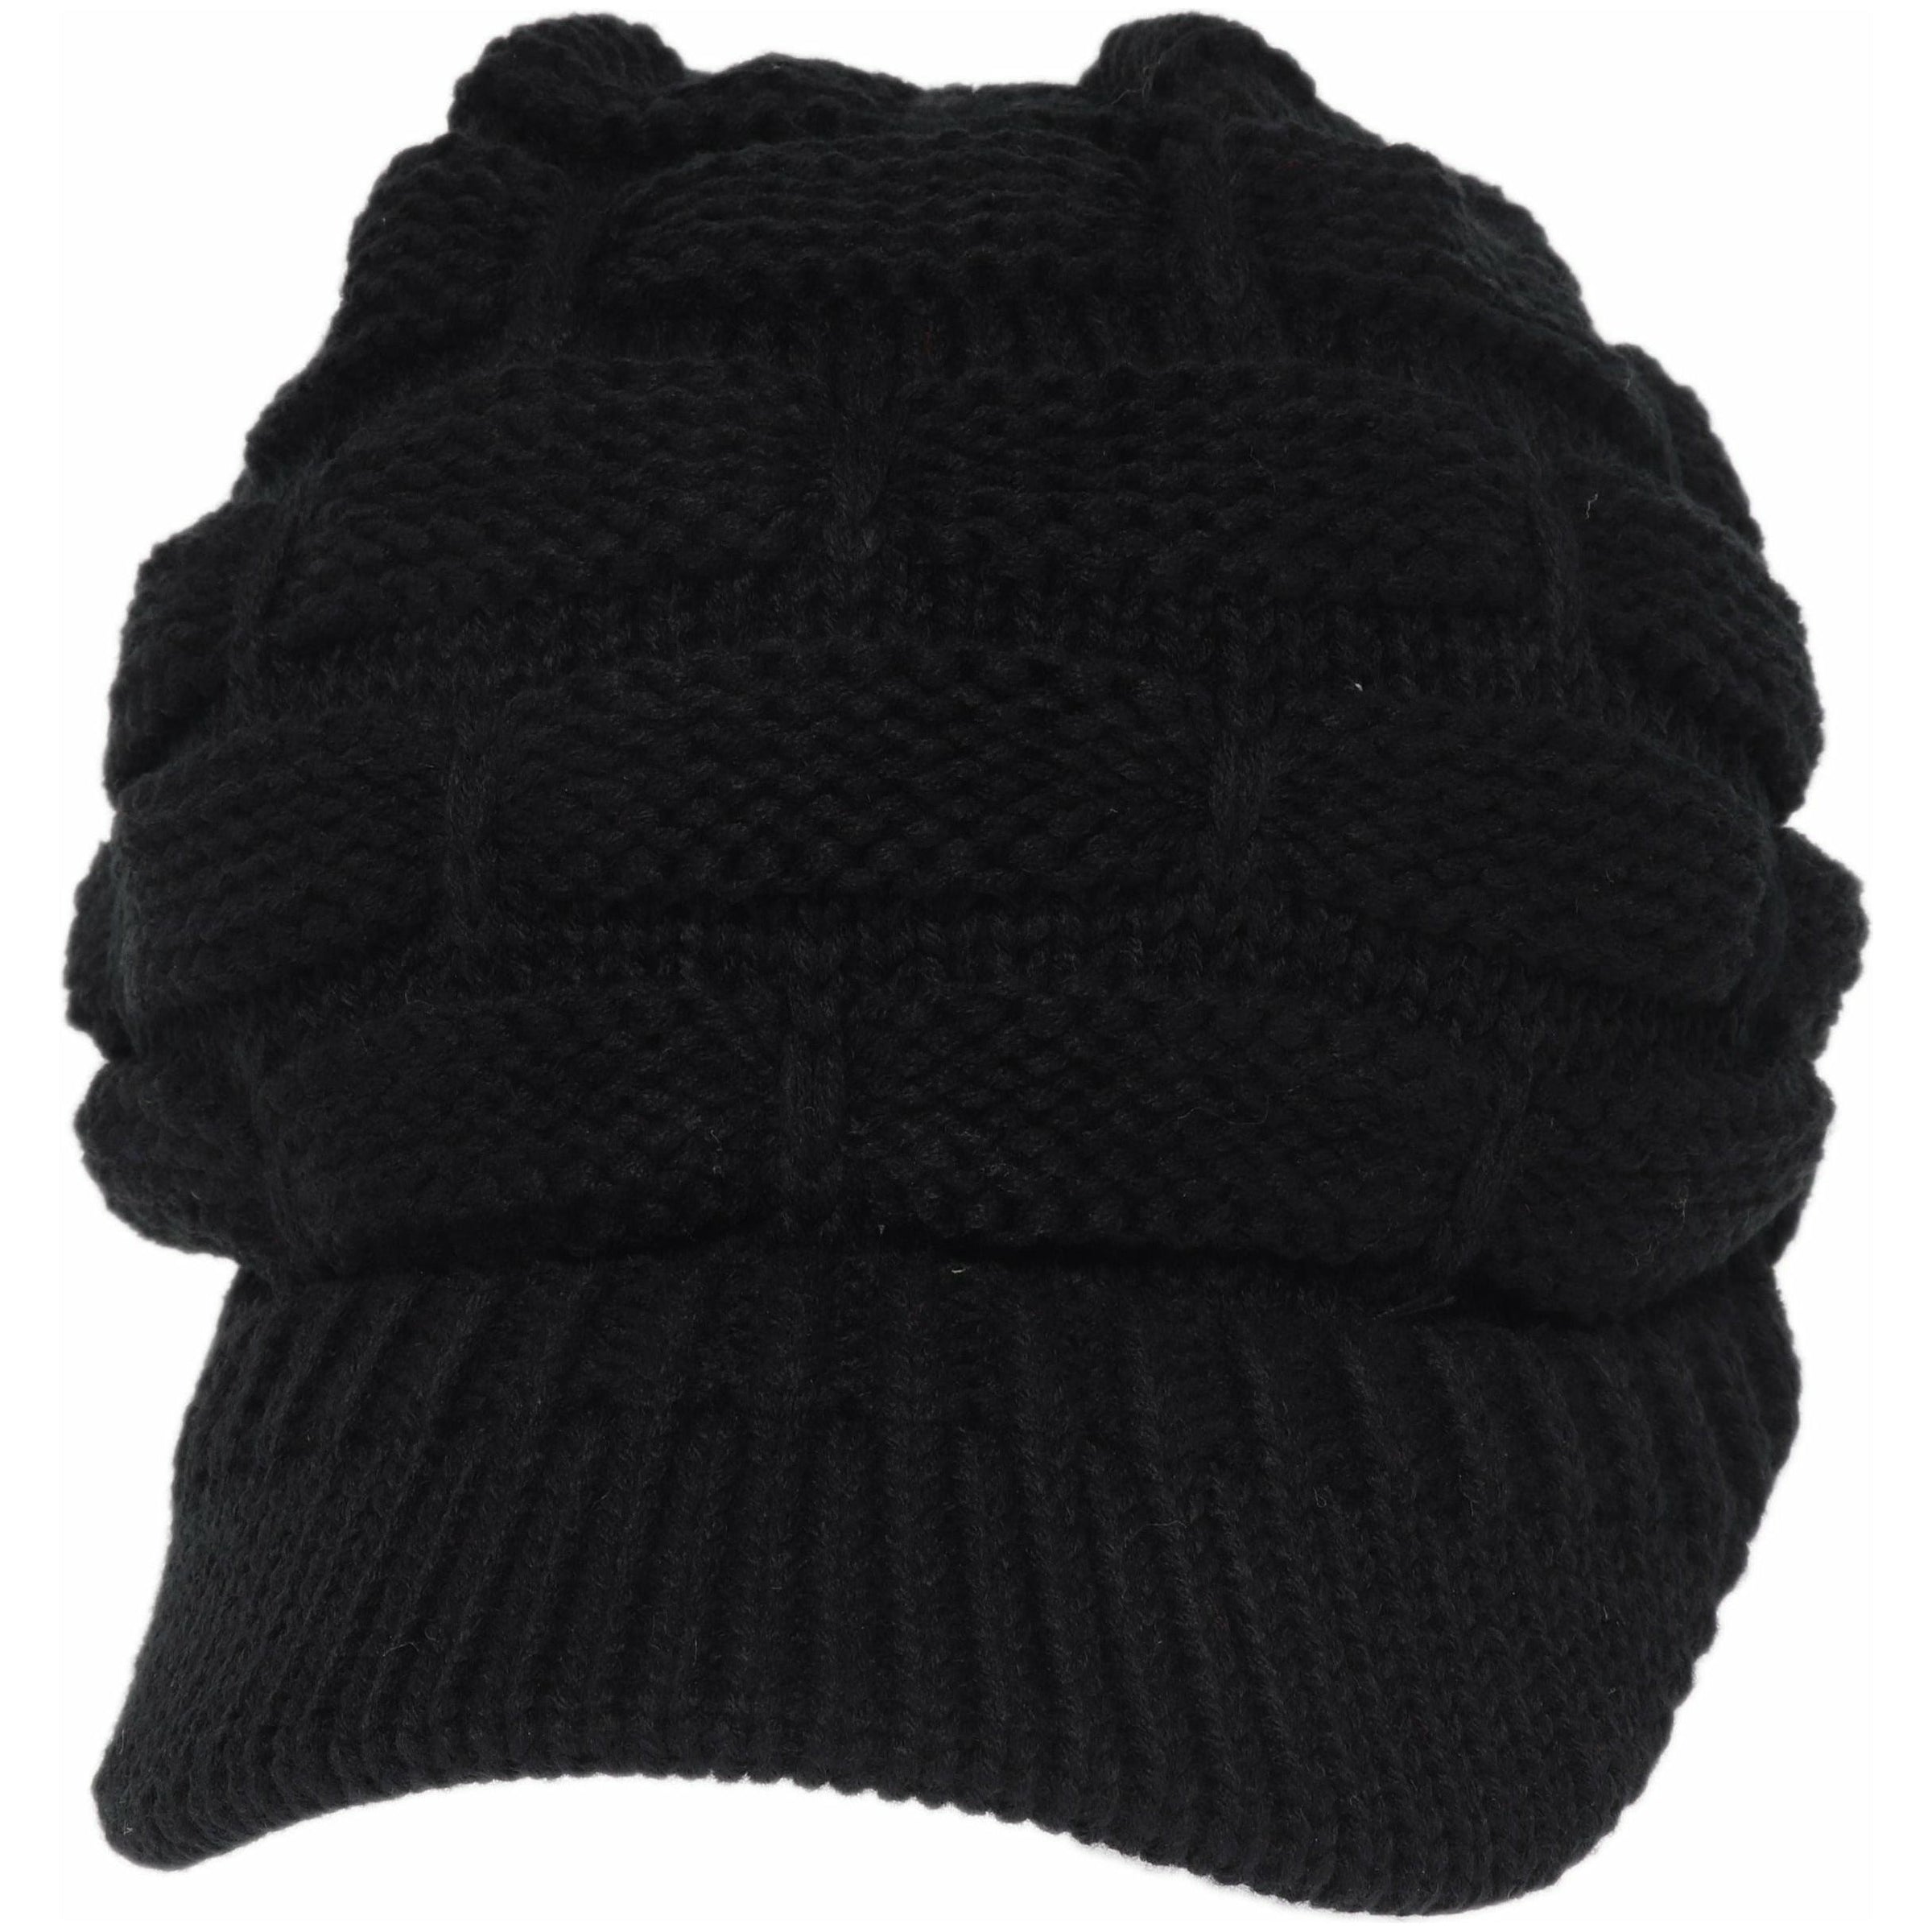 Natural Cotton Synthetic Wide Brim Ski Hat With Merkin Pubic Wig And Beanie  Attachment For Girls Long Curly Knit Winter Hat #12249S From Nxink, $26.33